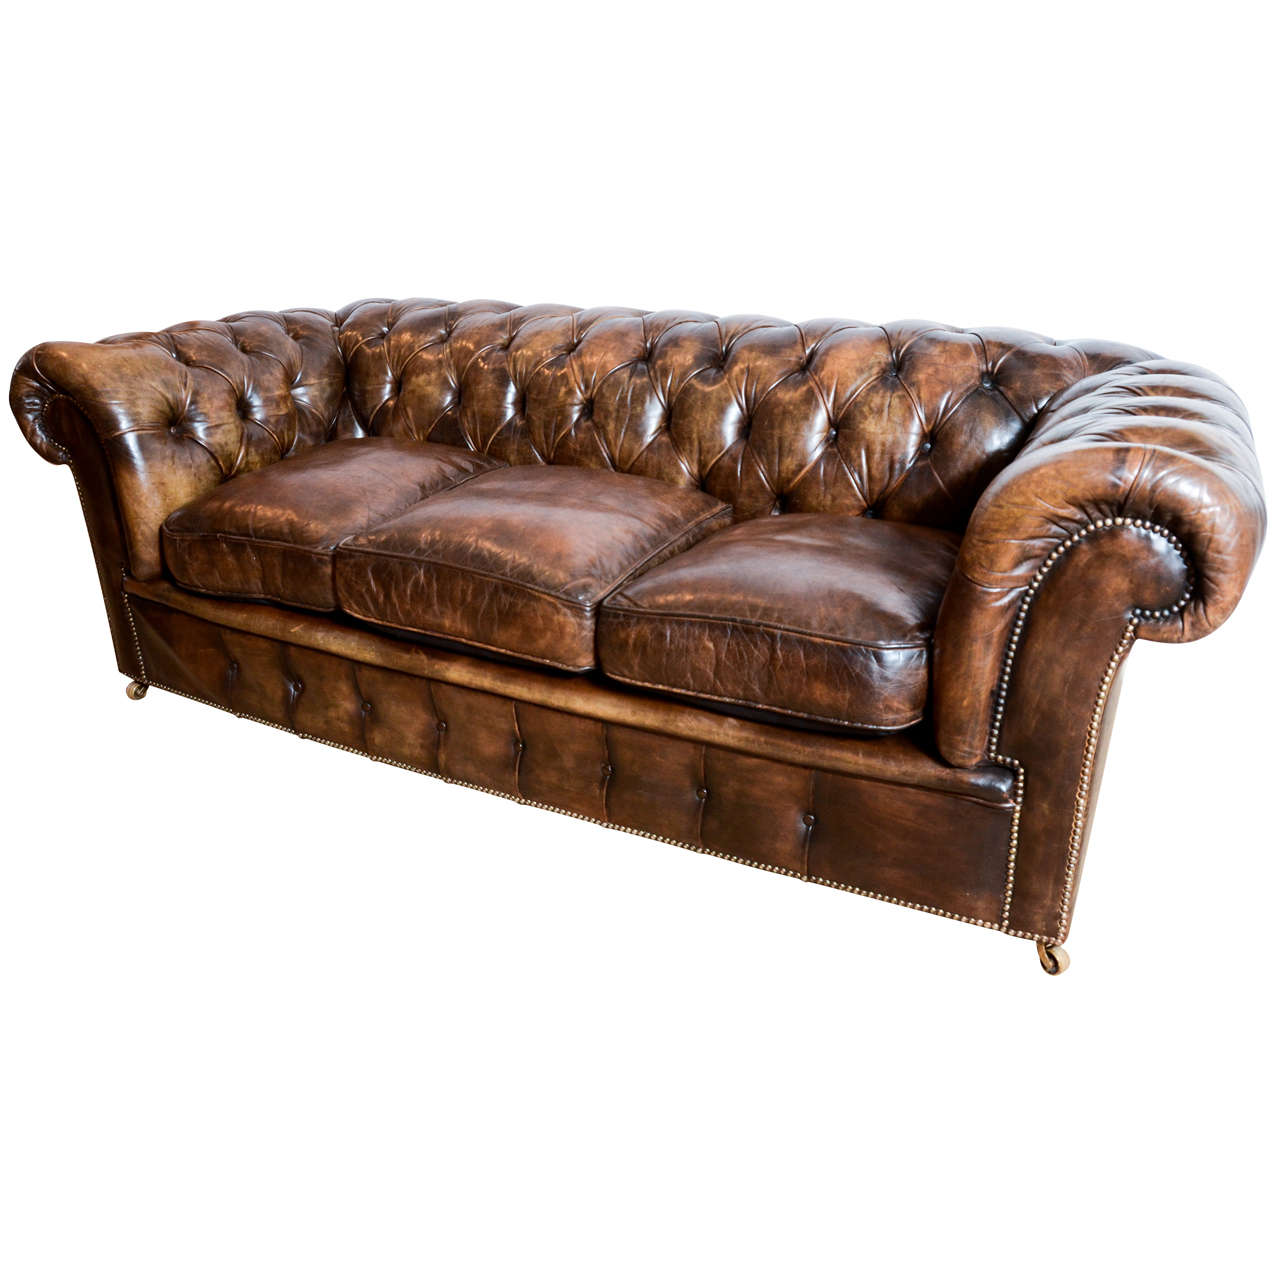 Upholstered Leather Chesterfield Sofa